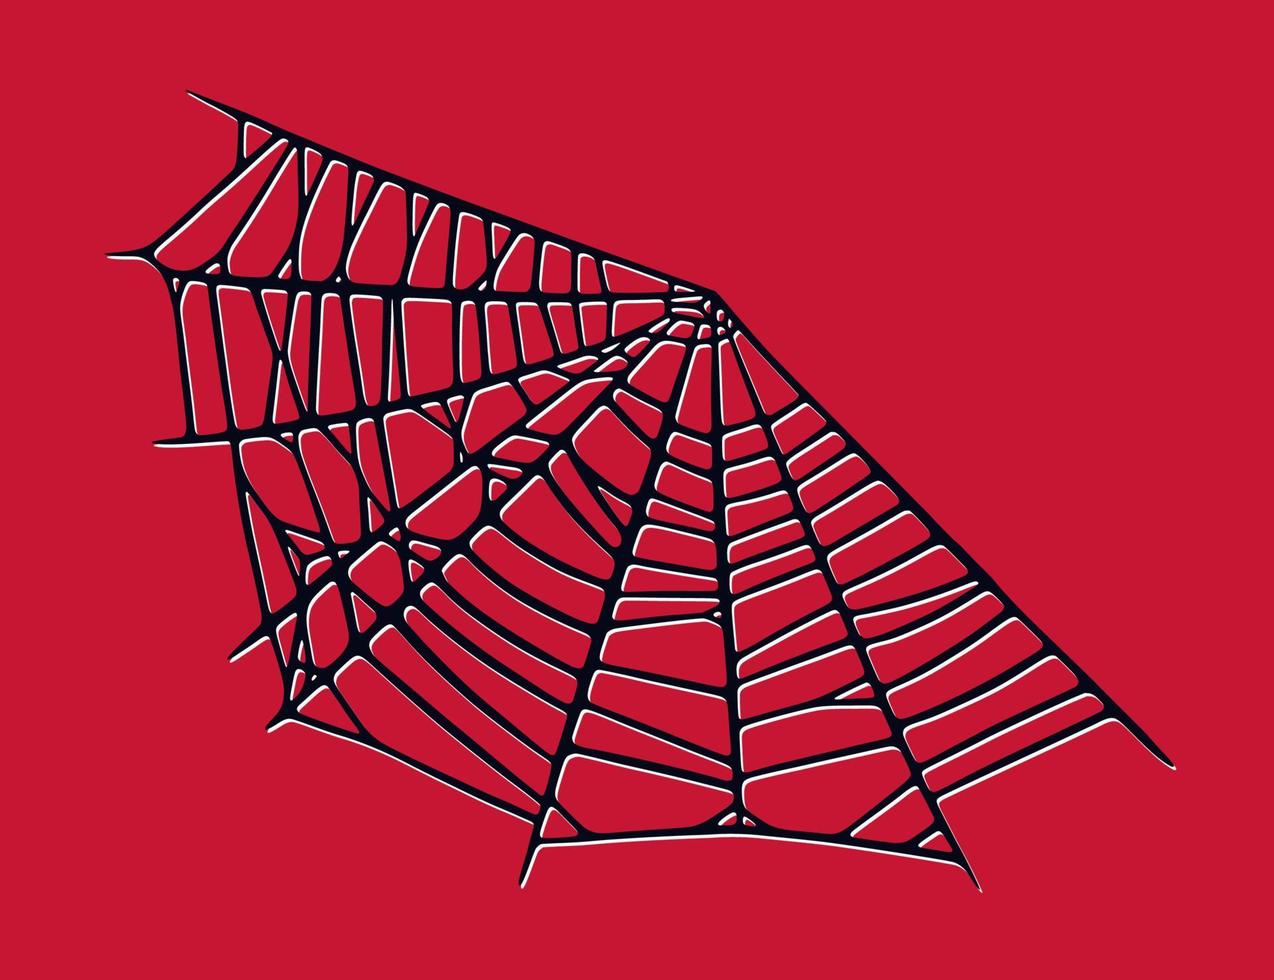 Spider web isolated on red background. Spooky Halloween cobwebs with red threads. Vector illustration